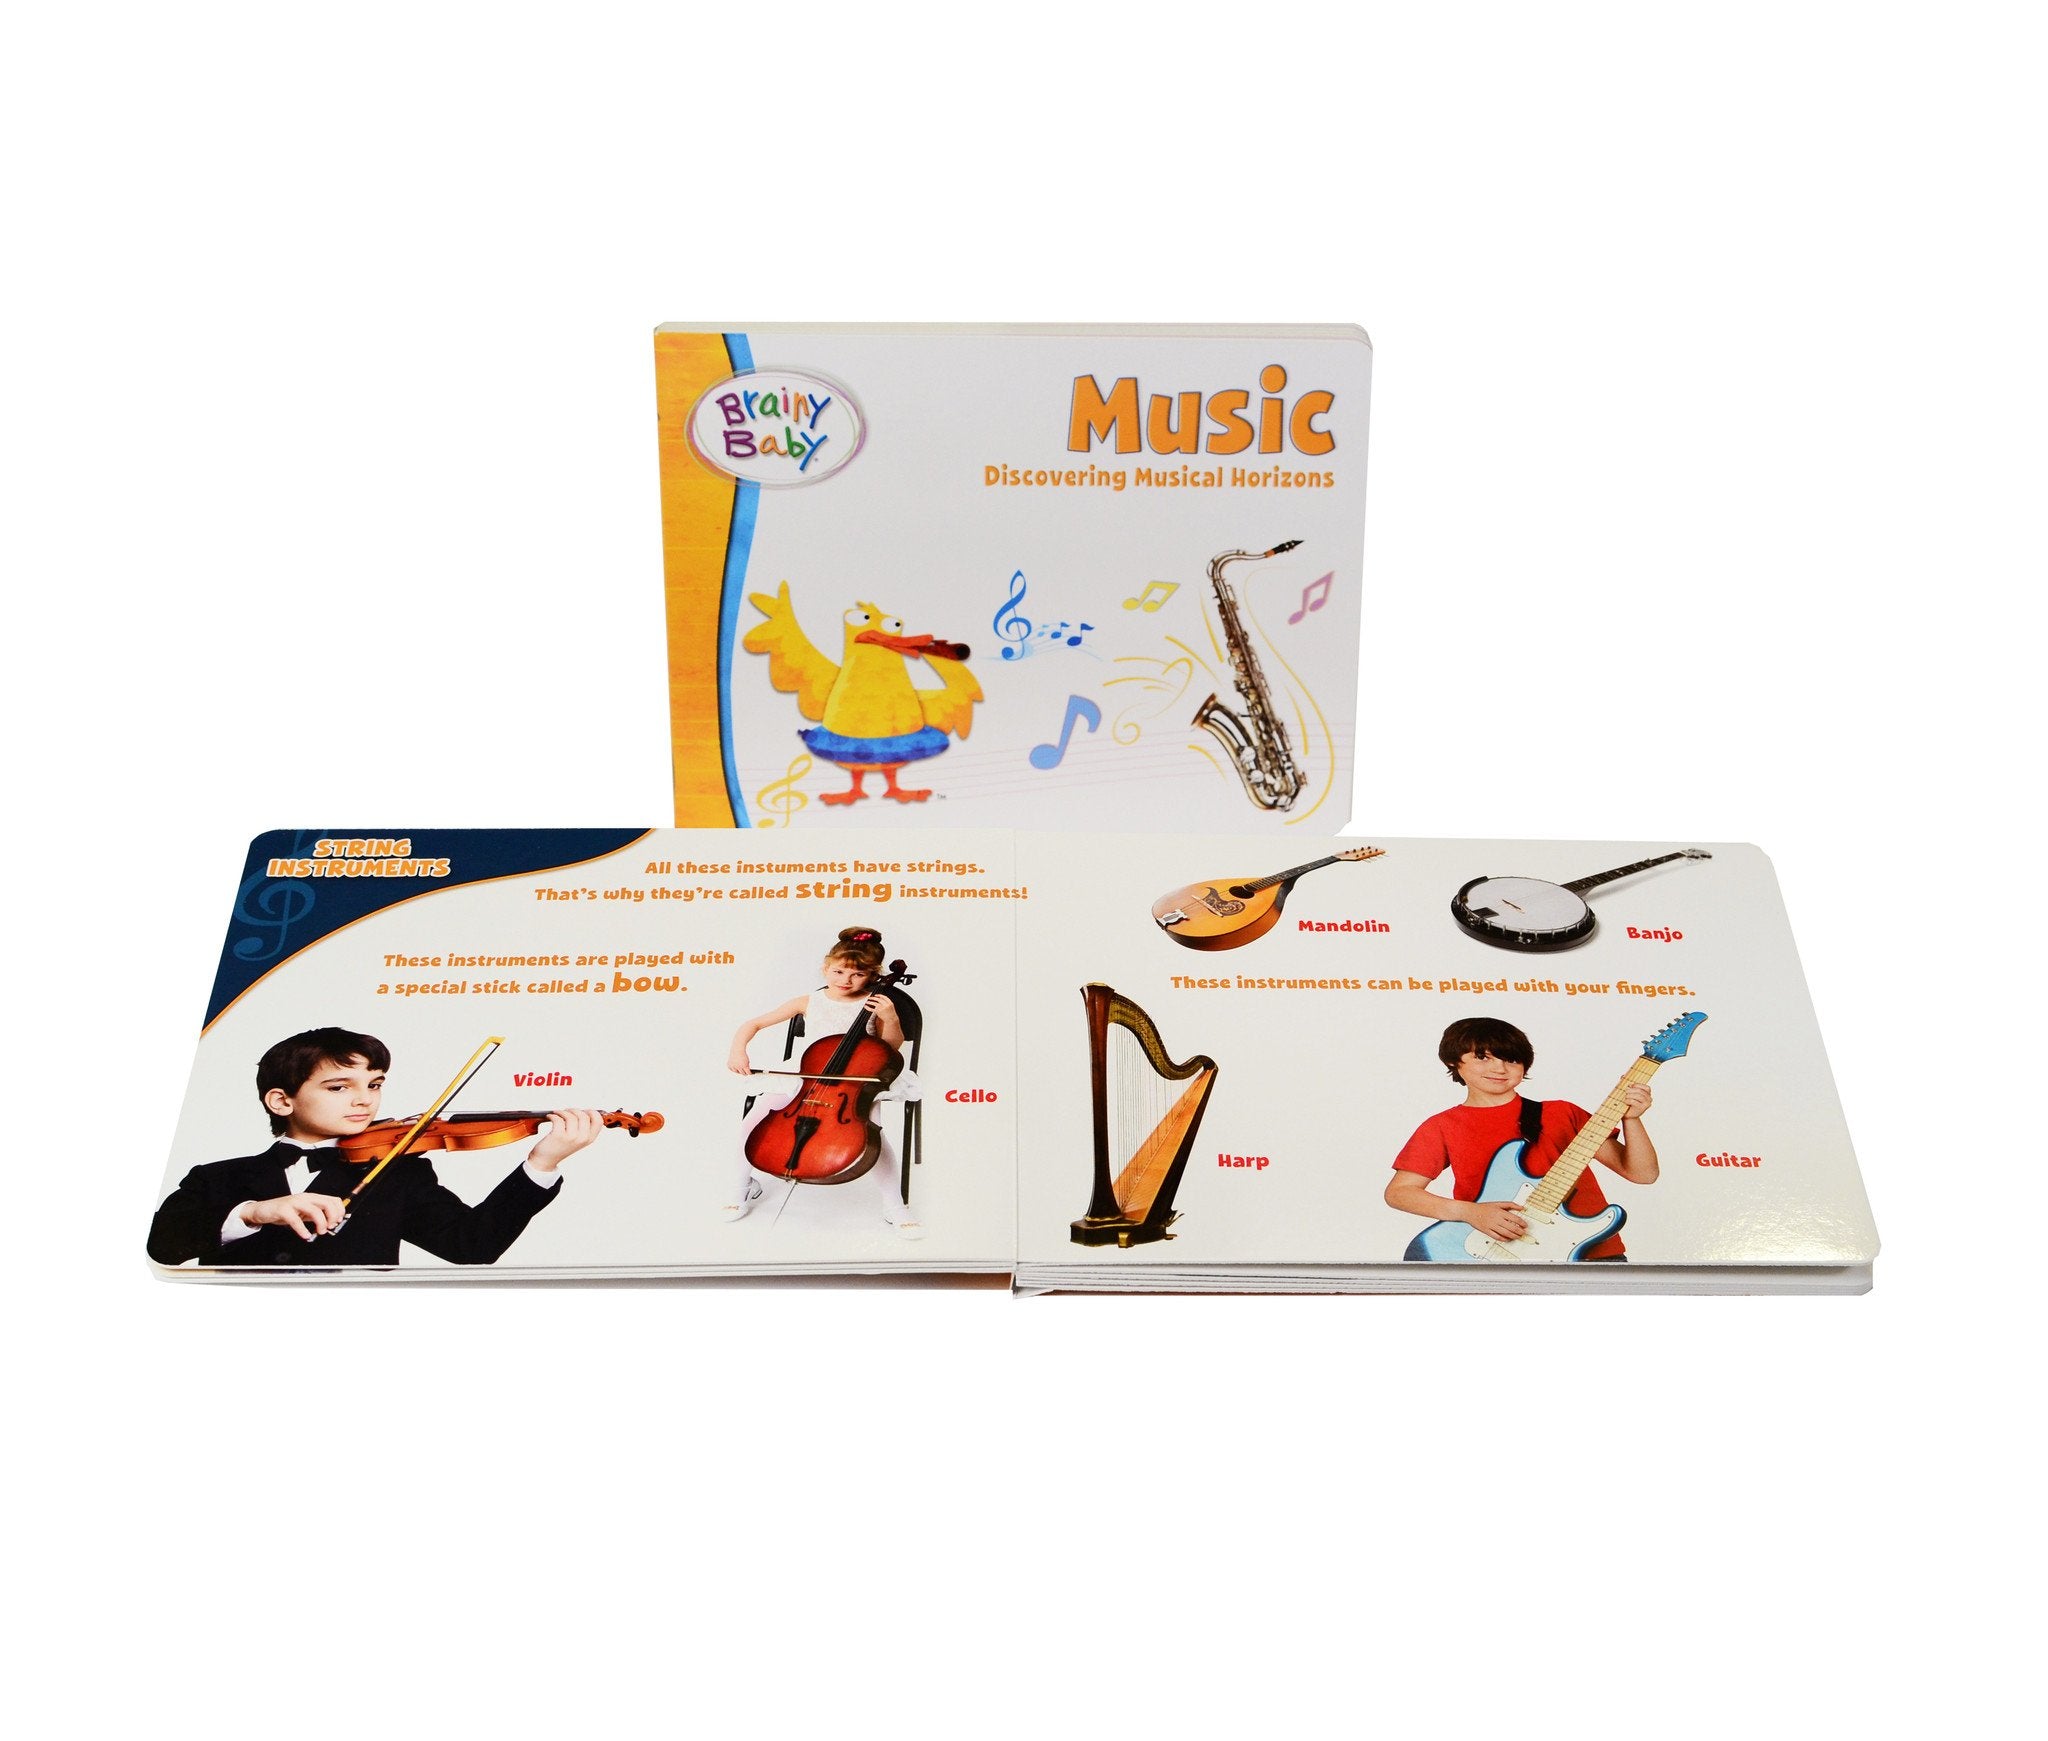 Brainy Baby®Discovering Musical Horizons Board Book for Preschool Children